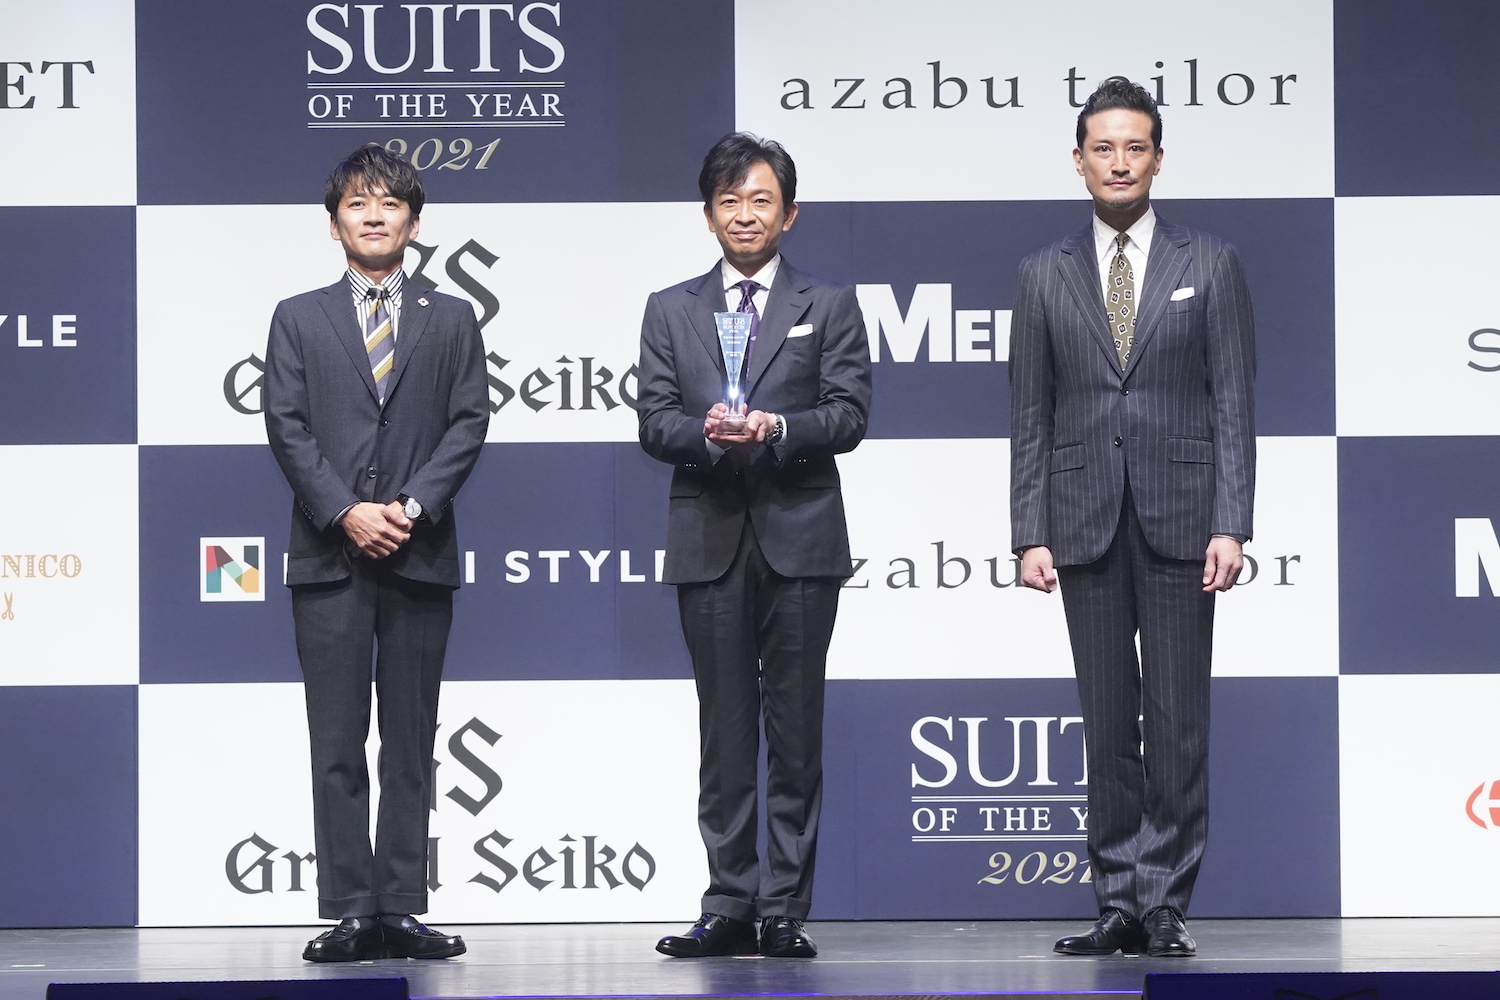 「SUITS OF THE YEAR 2021」アート＆カルチャー部門を受賞、授賞式に出席したTOKIO